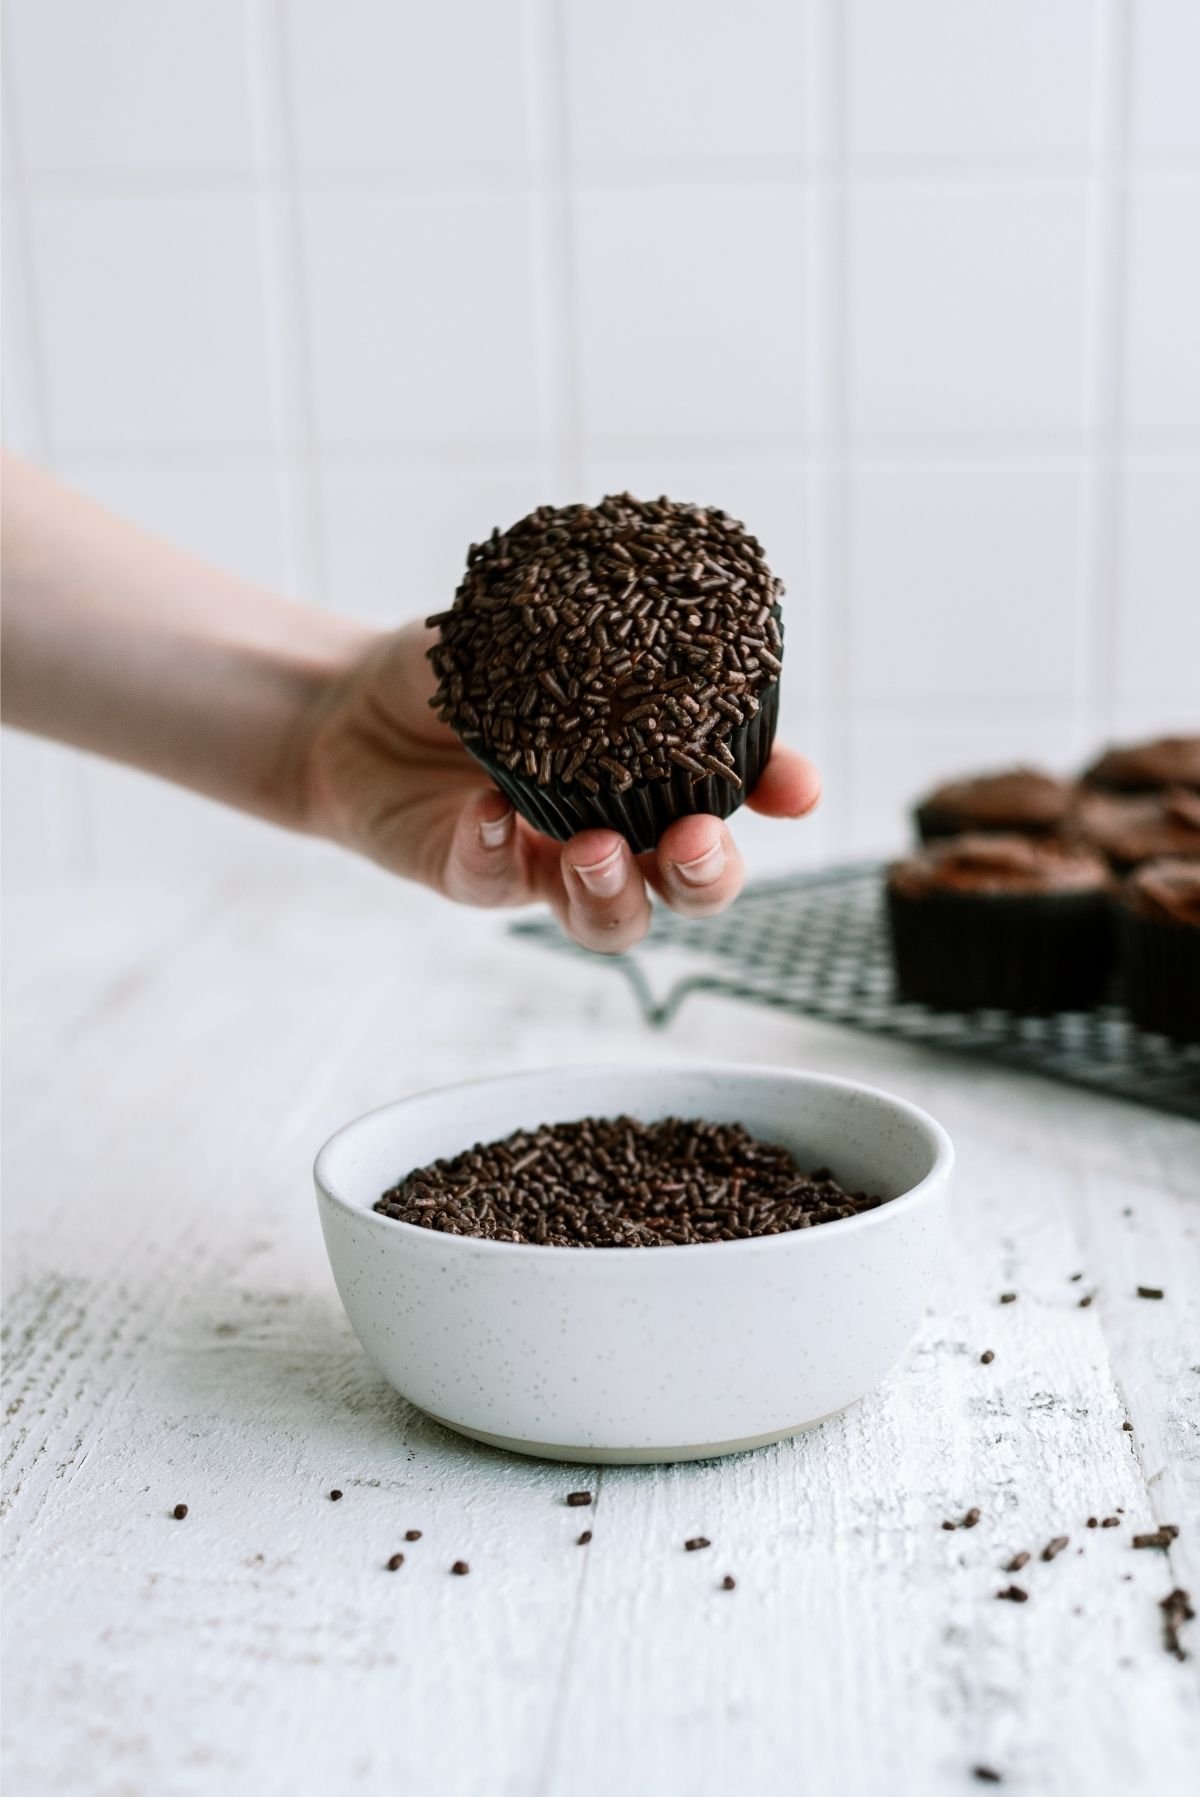 Chocolate cupcake with frosting dipped into a bowl of chocolate sprinkles